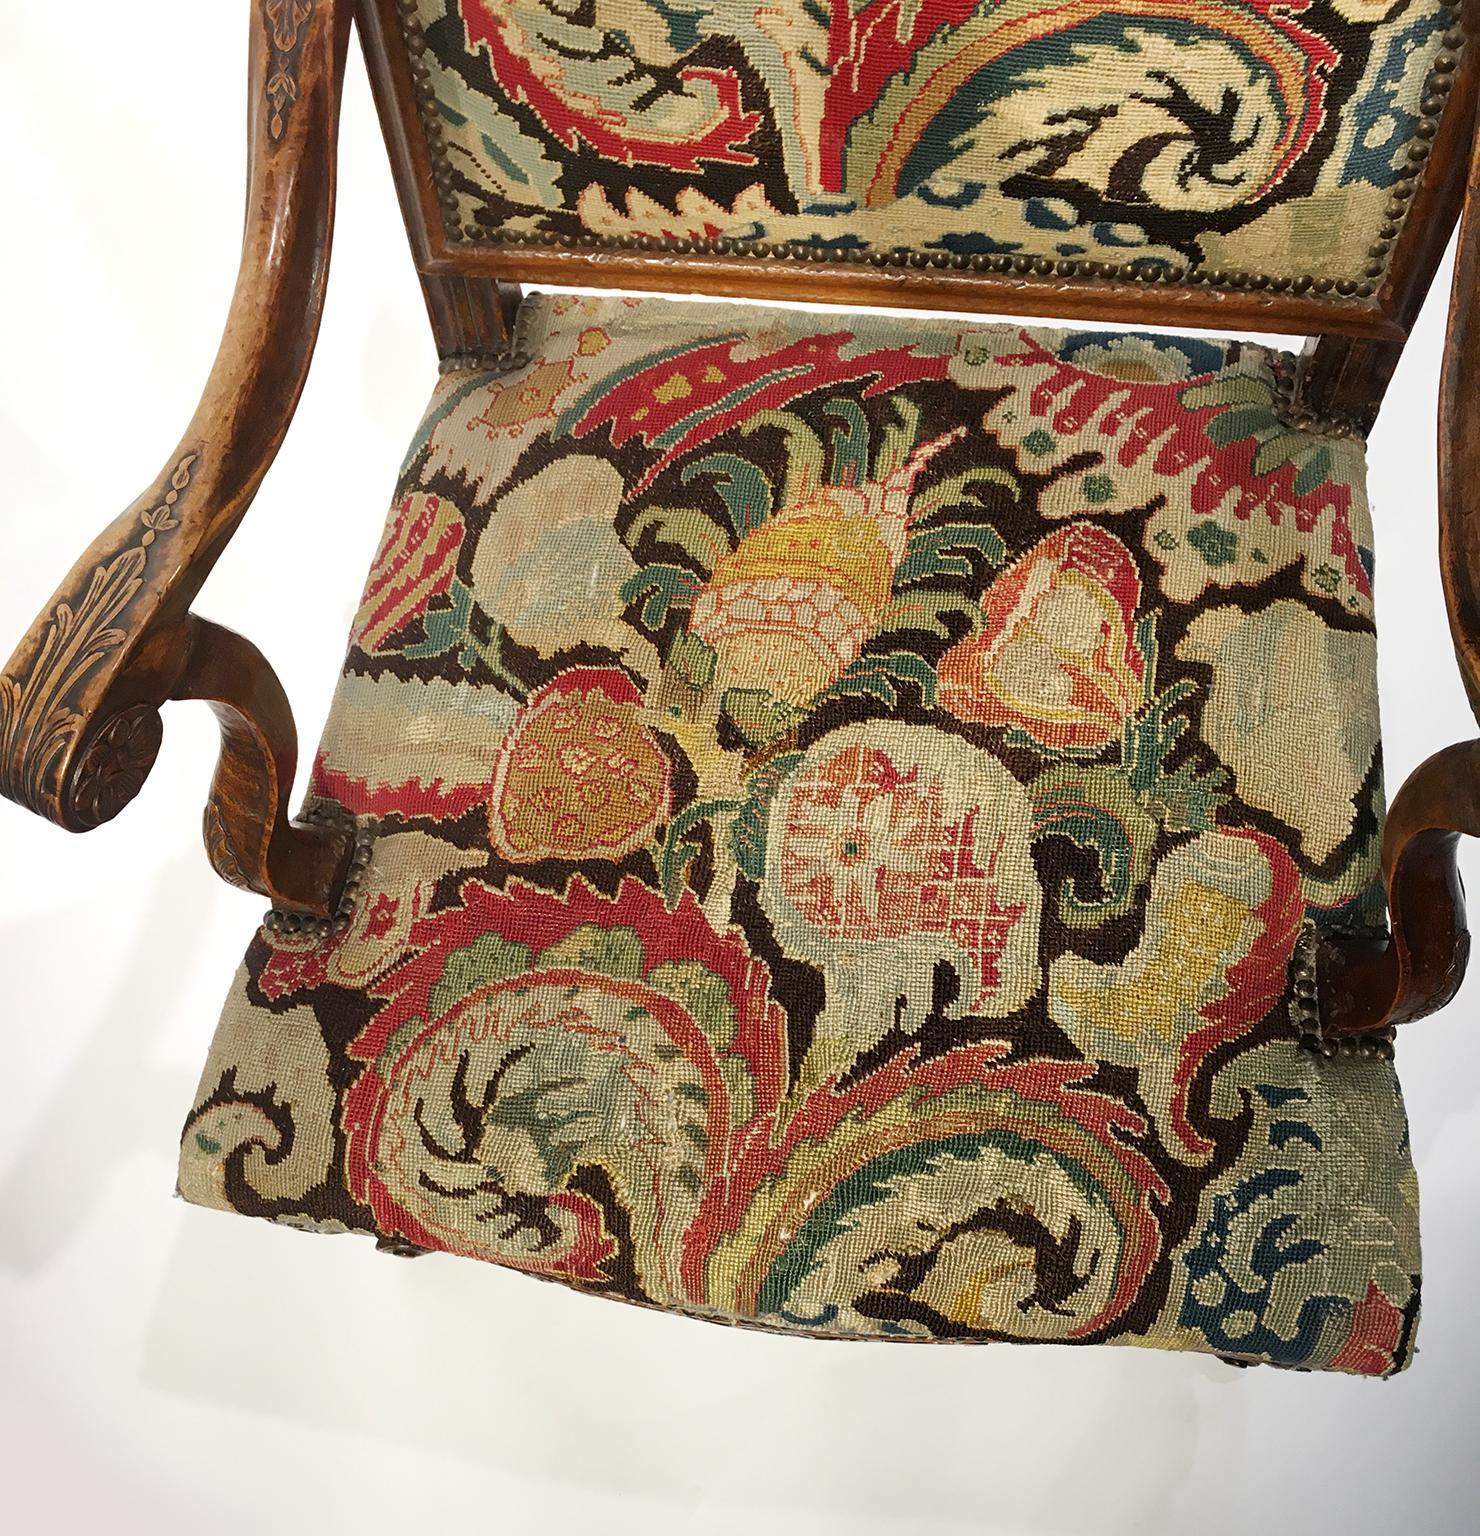 Carved Pair of French Régence Armchairs with Petit Point Embroidery, France, circa 1725